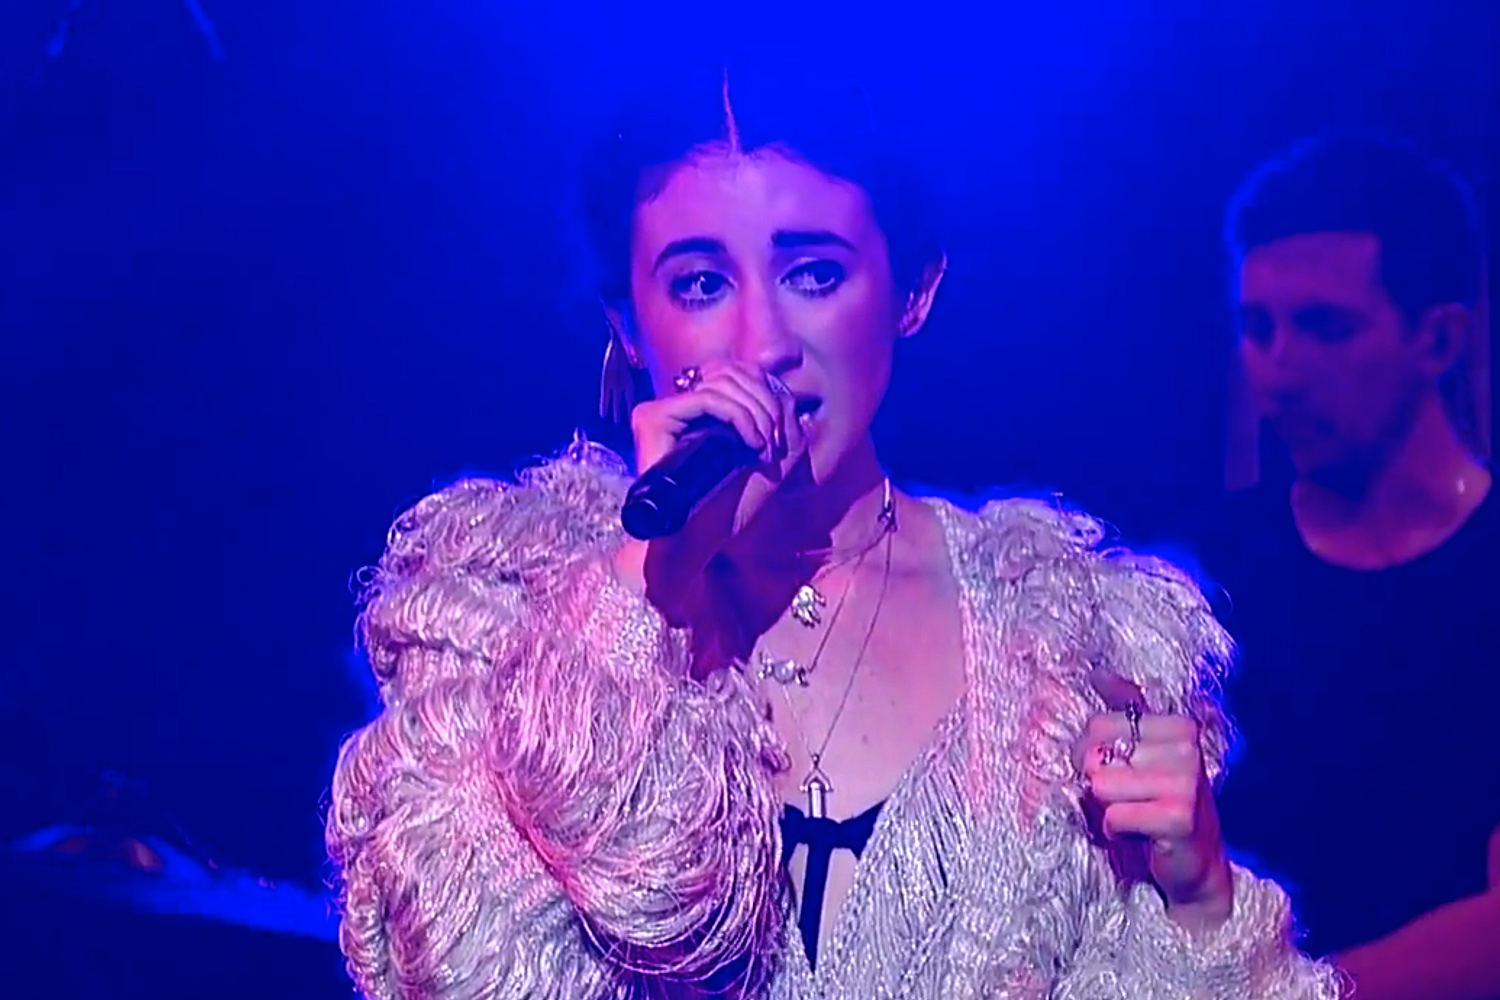 Watch Hundred Waters make their TV debut with ‘Cavity’ on Letterman